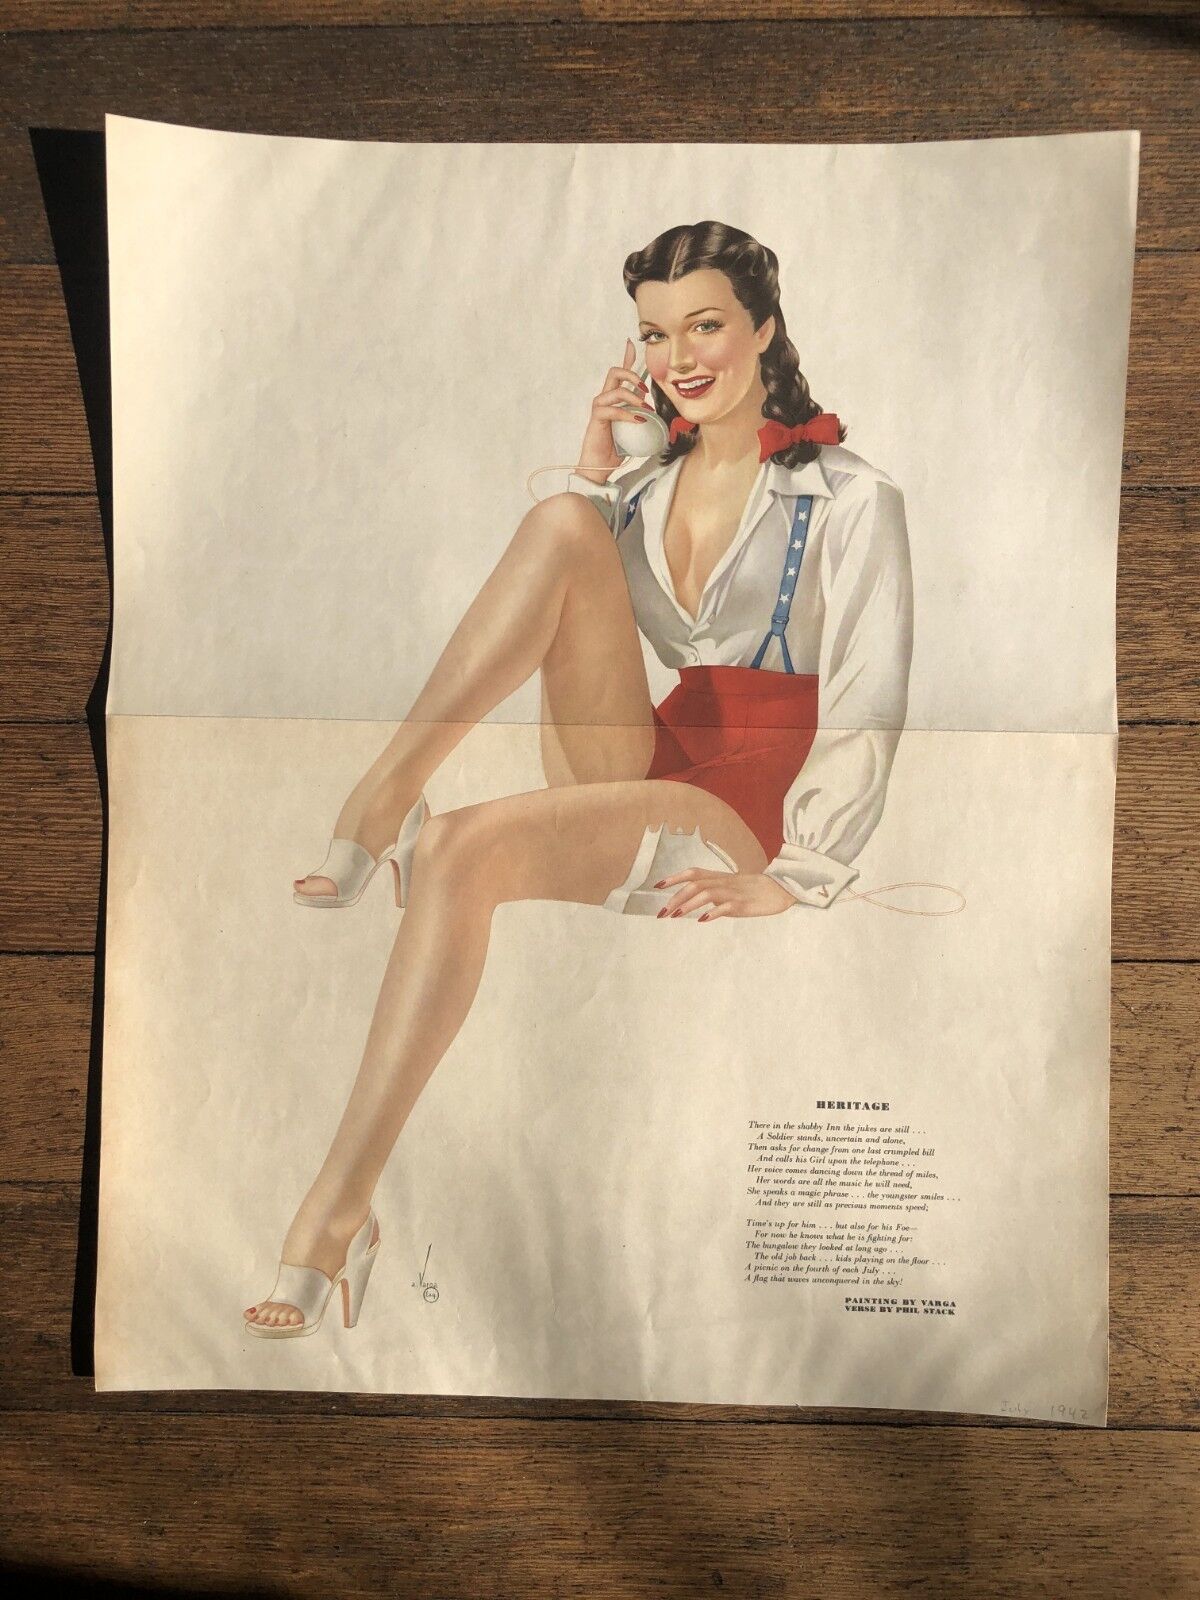 1942 Esquire Magazine Pinup Girl Centerfold by Varga- Heritage